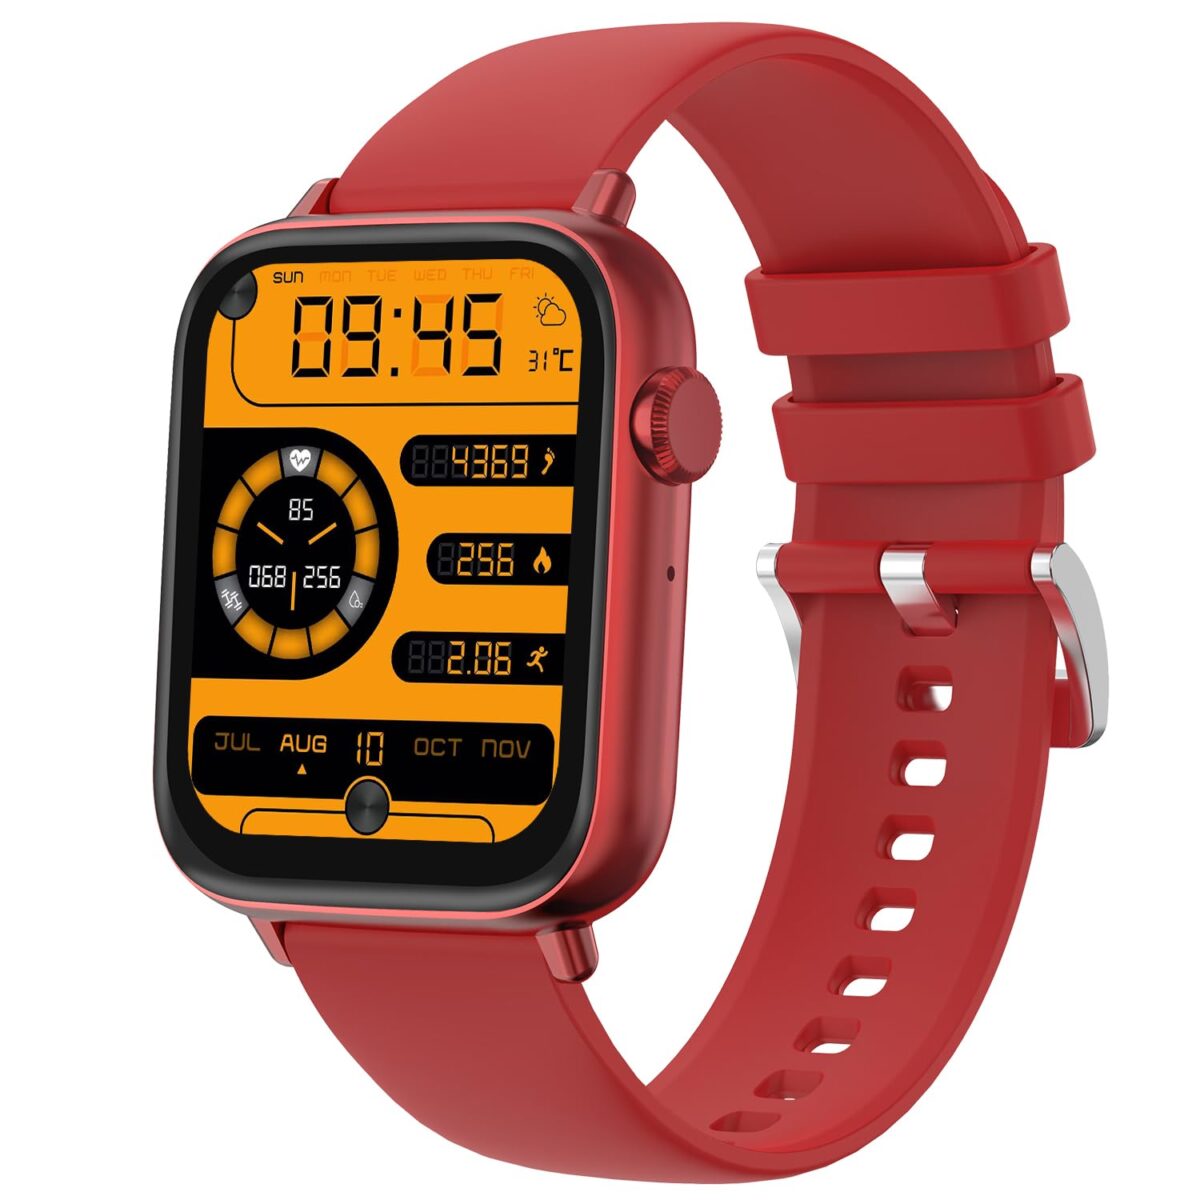 Fire-boltt newly launched ninja fit pro smartwatch (red)